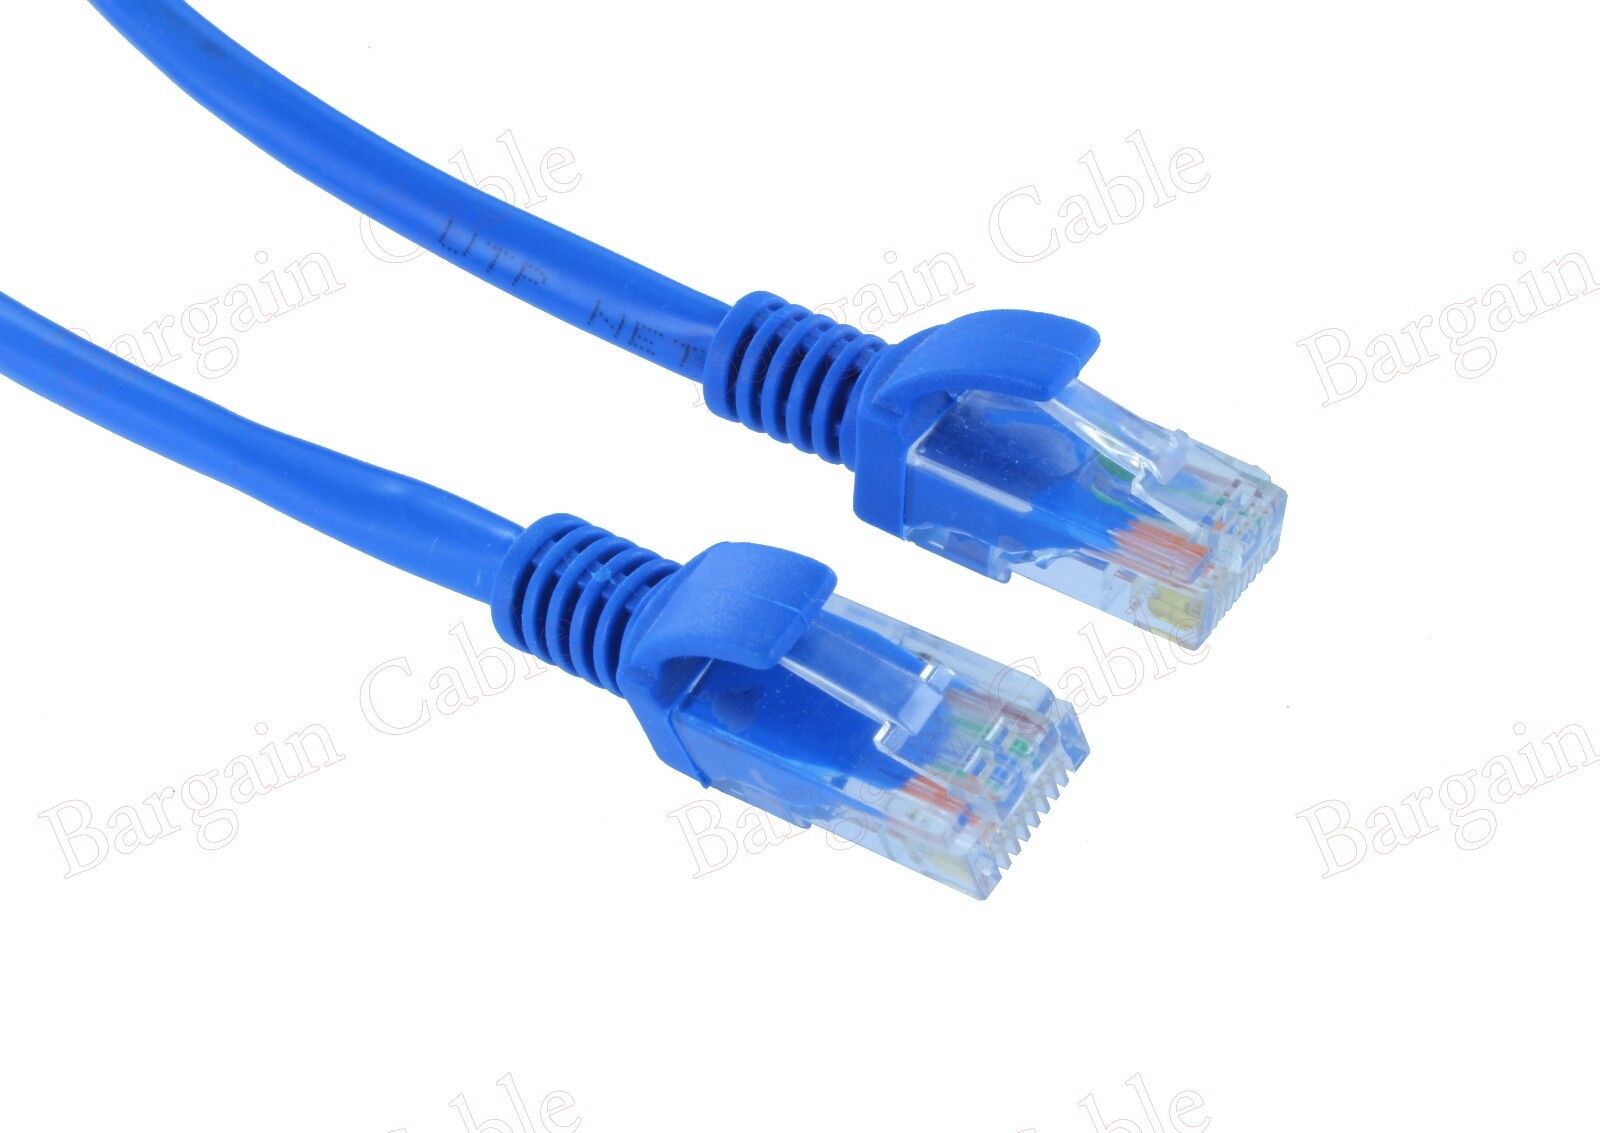 Wholesale CAT5E NETWORK ETHERNET CABLE 1FT 5FT 25FT 50FT 75FT 150FT